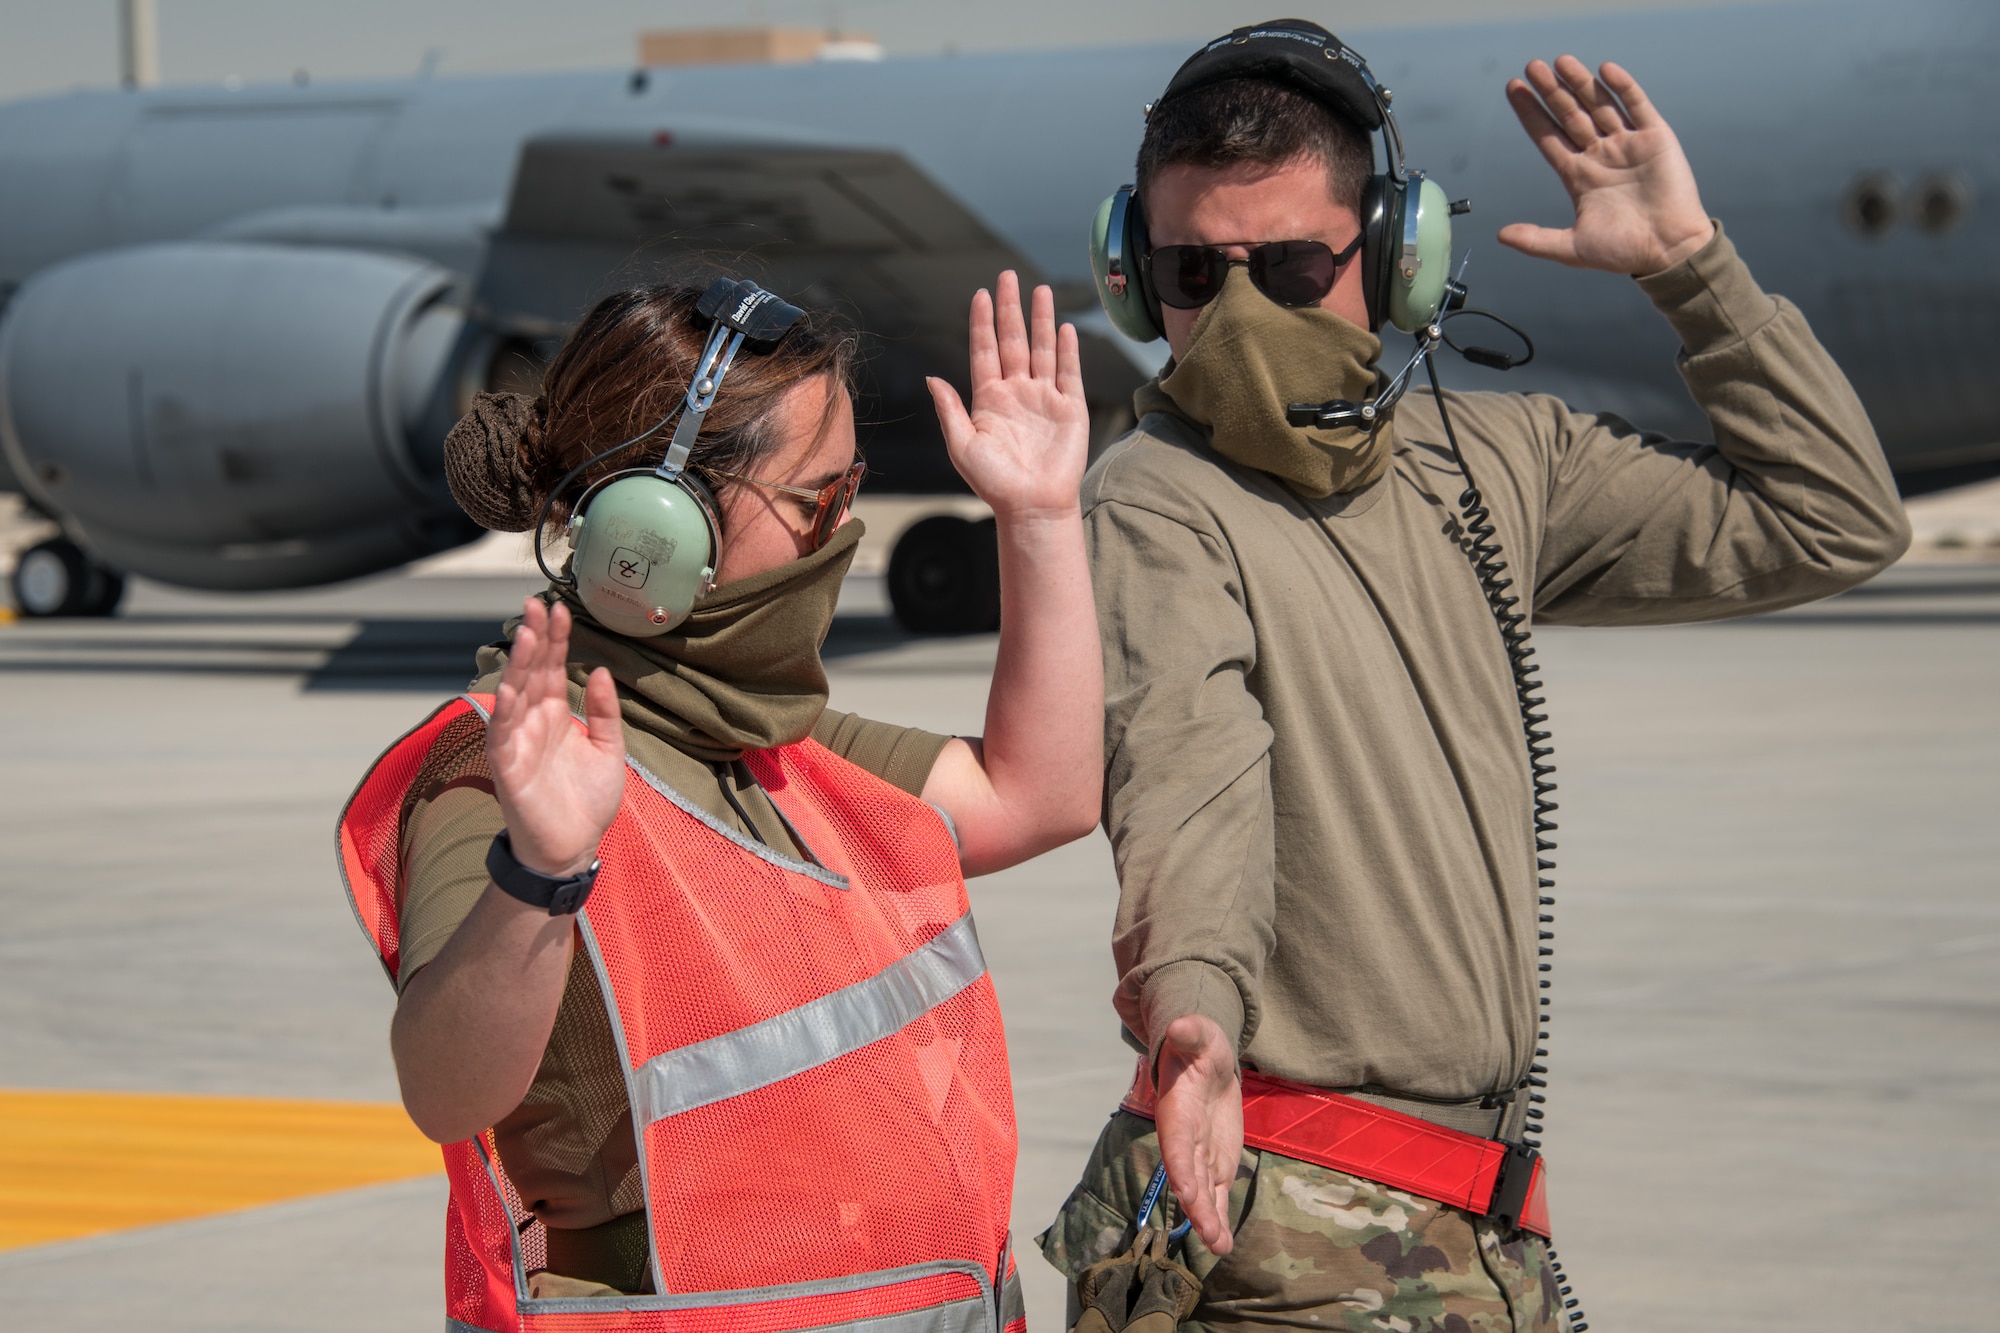 Two airmen use their arms to signal an aircraft pilot who is out of frame